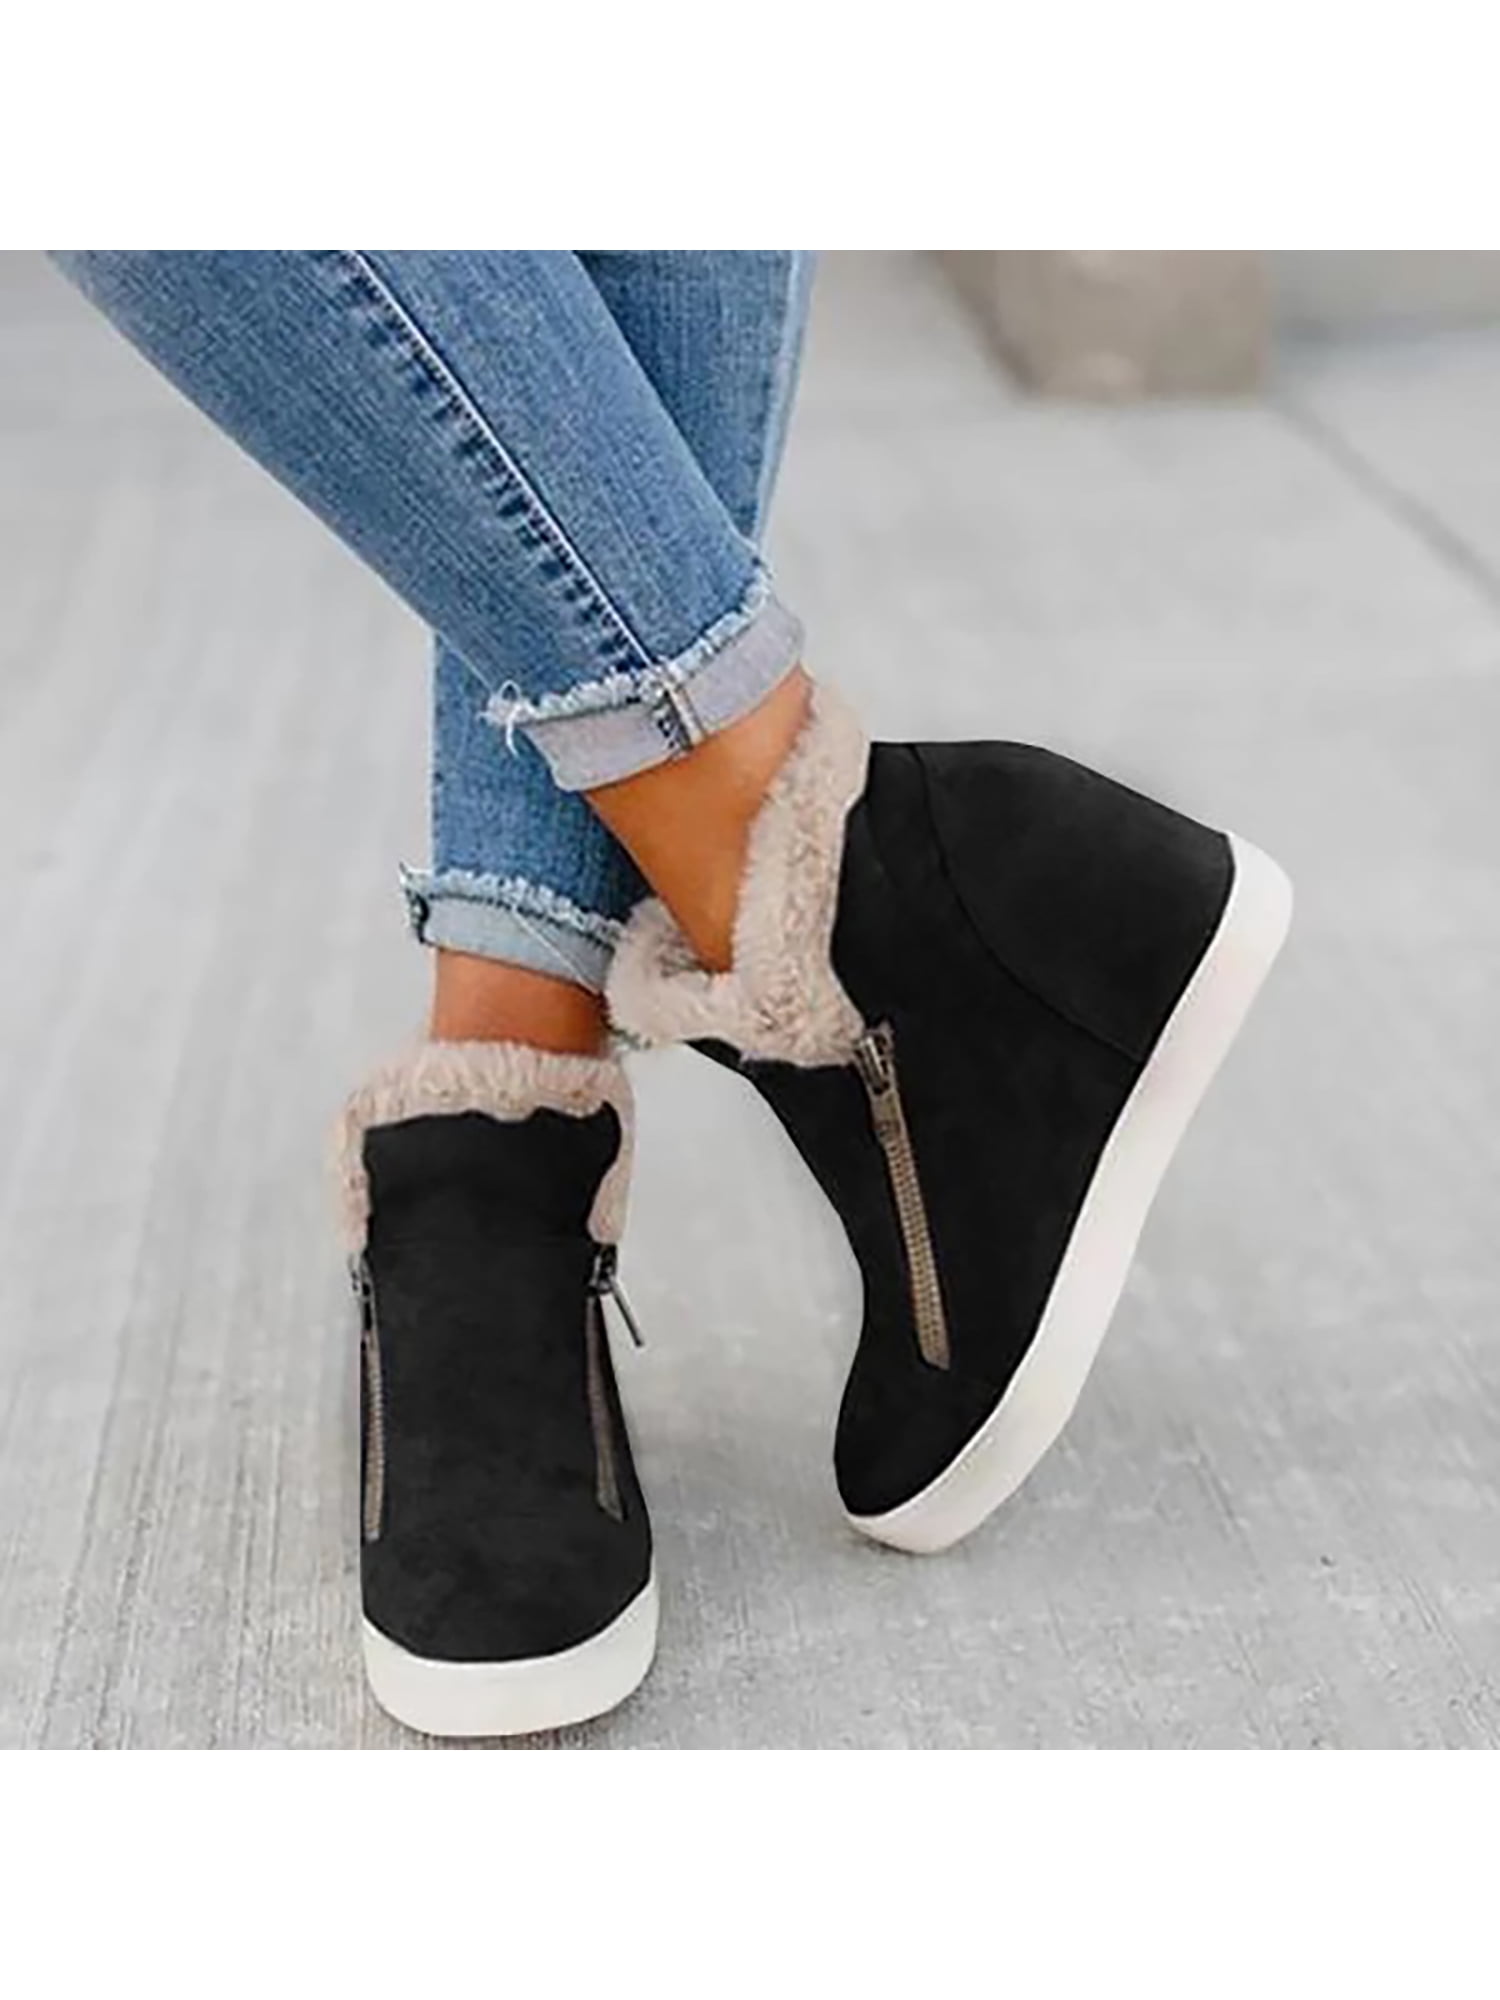 Details about   Women New Hidden Wedge Heel Ankle Casual Boots Blingbling Outdoor Warm Boots D